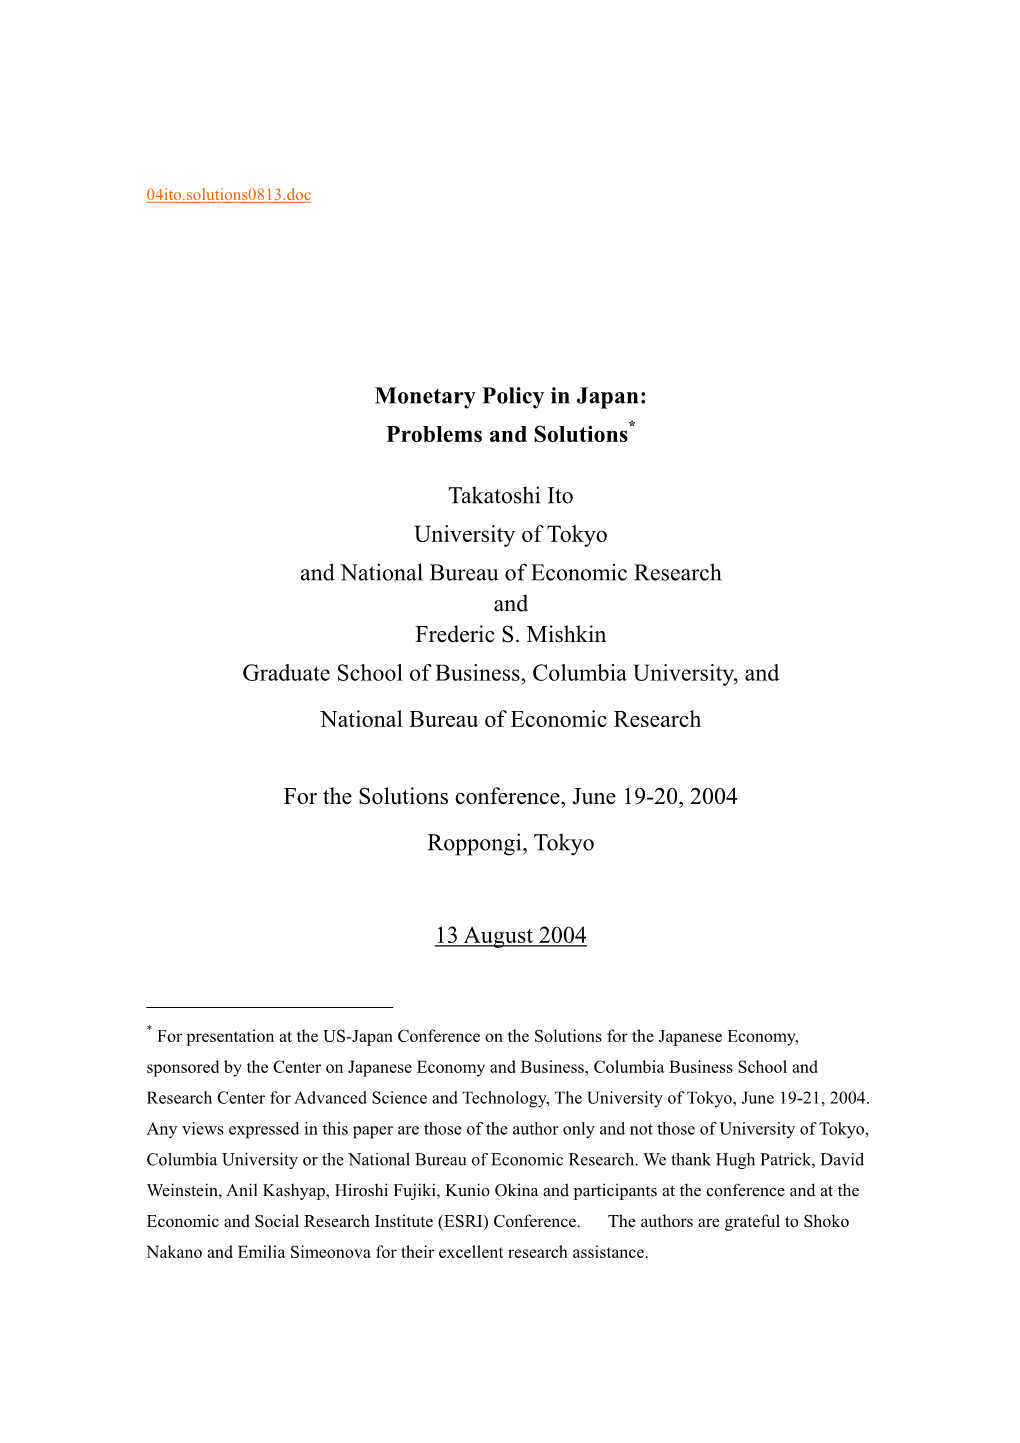 Monetary Policy in Japan: Problems and Solutions Takatoshi Ito